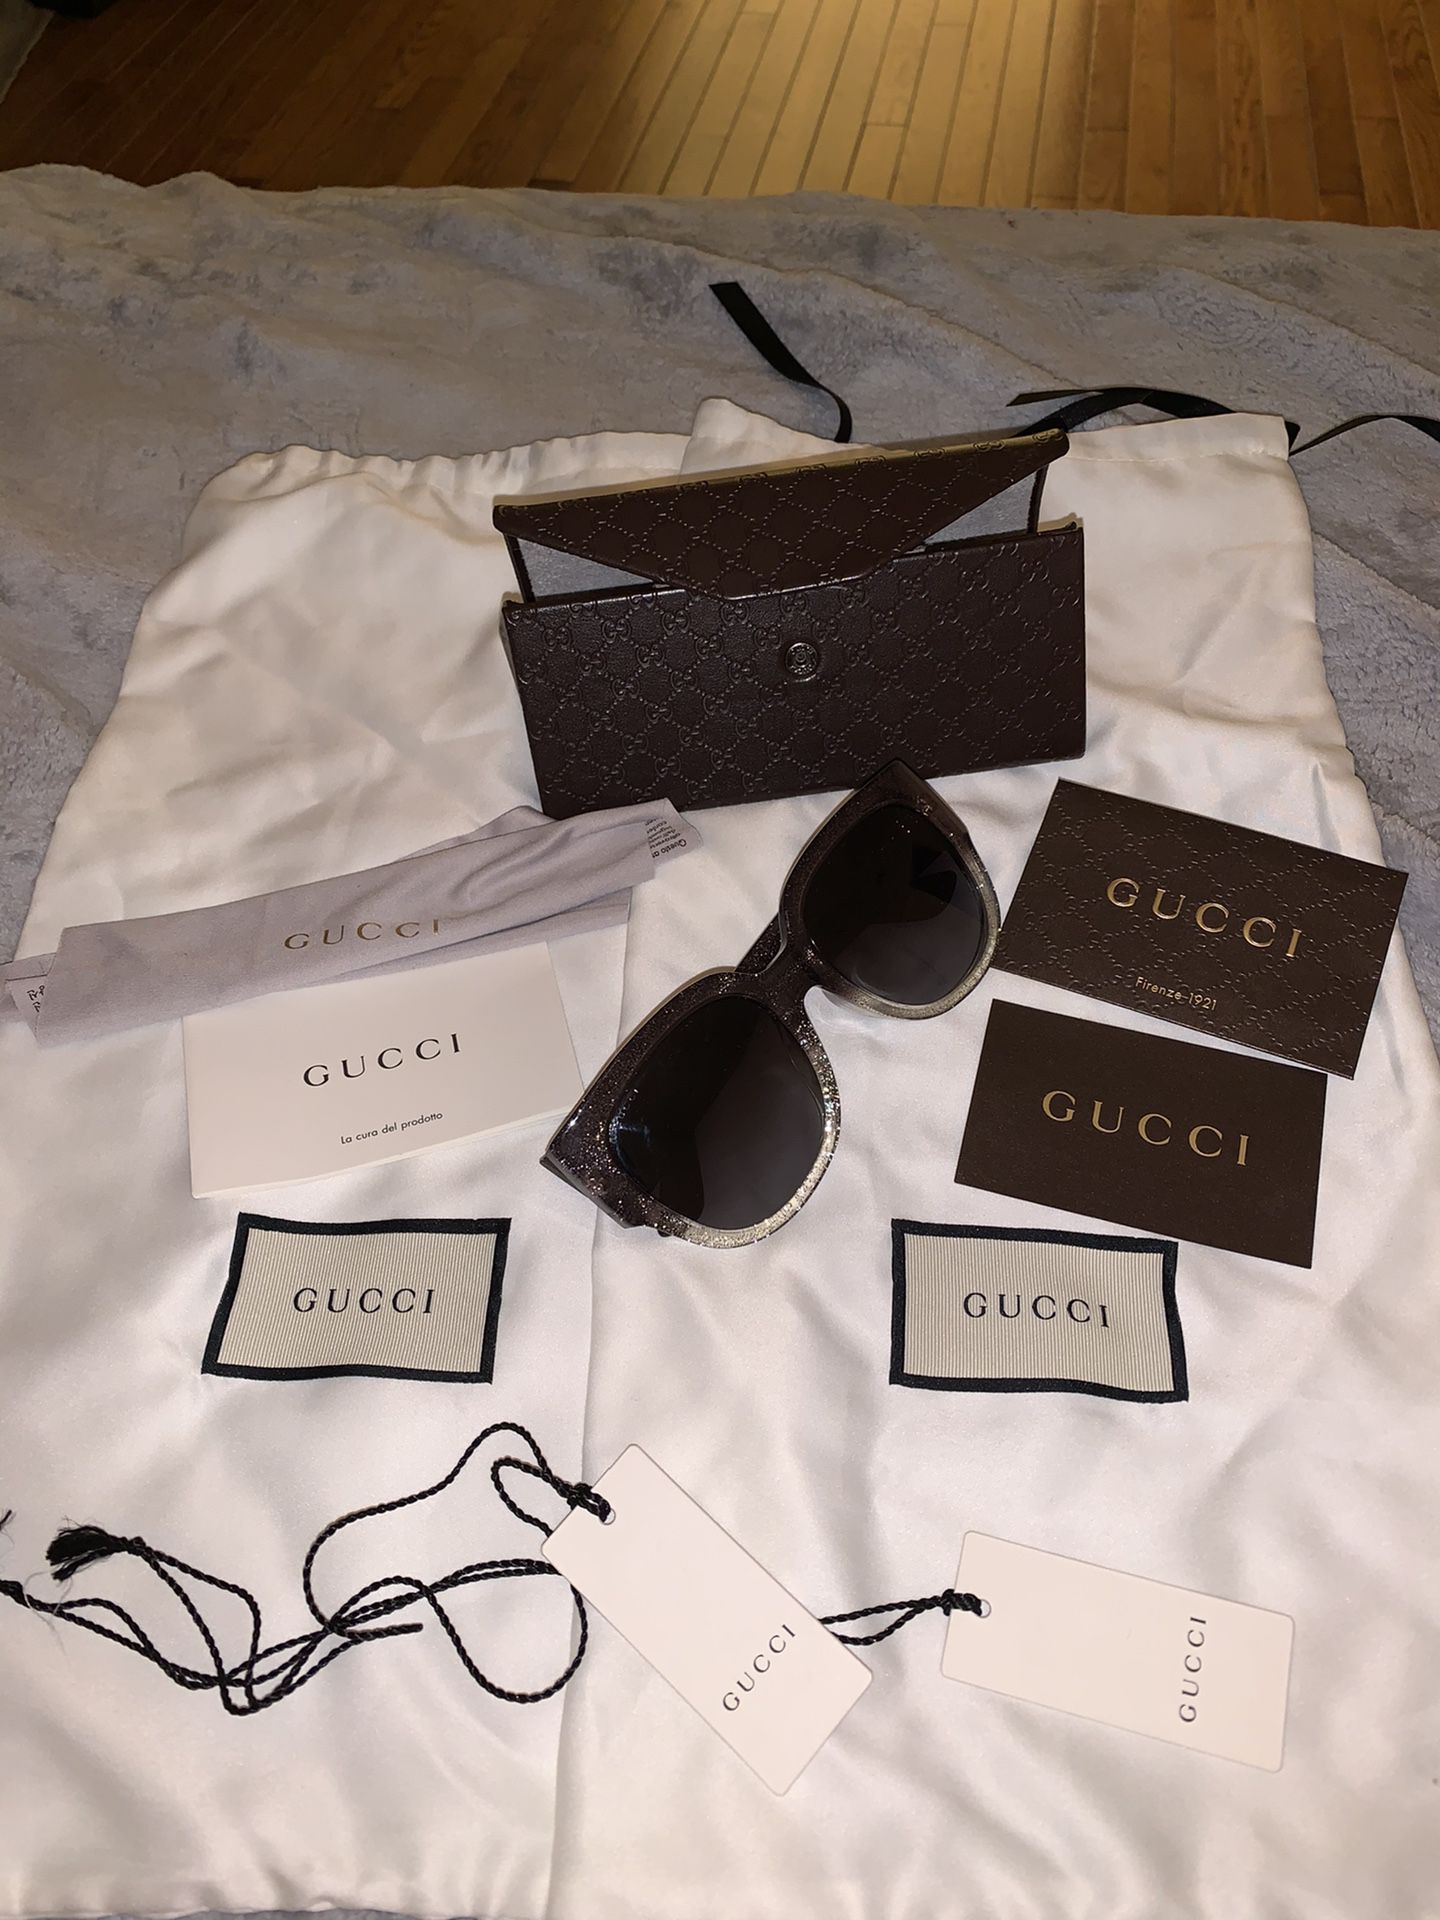 Gucci sunglasses 🕶 with shoe bags